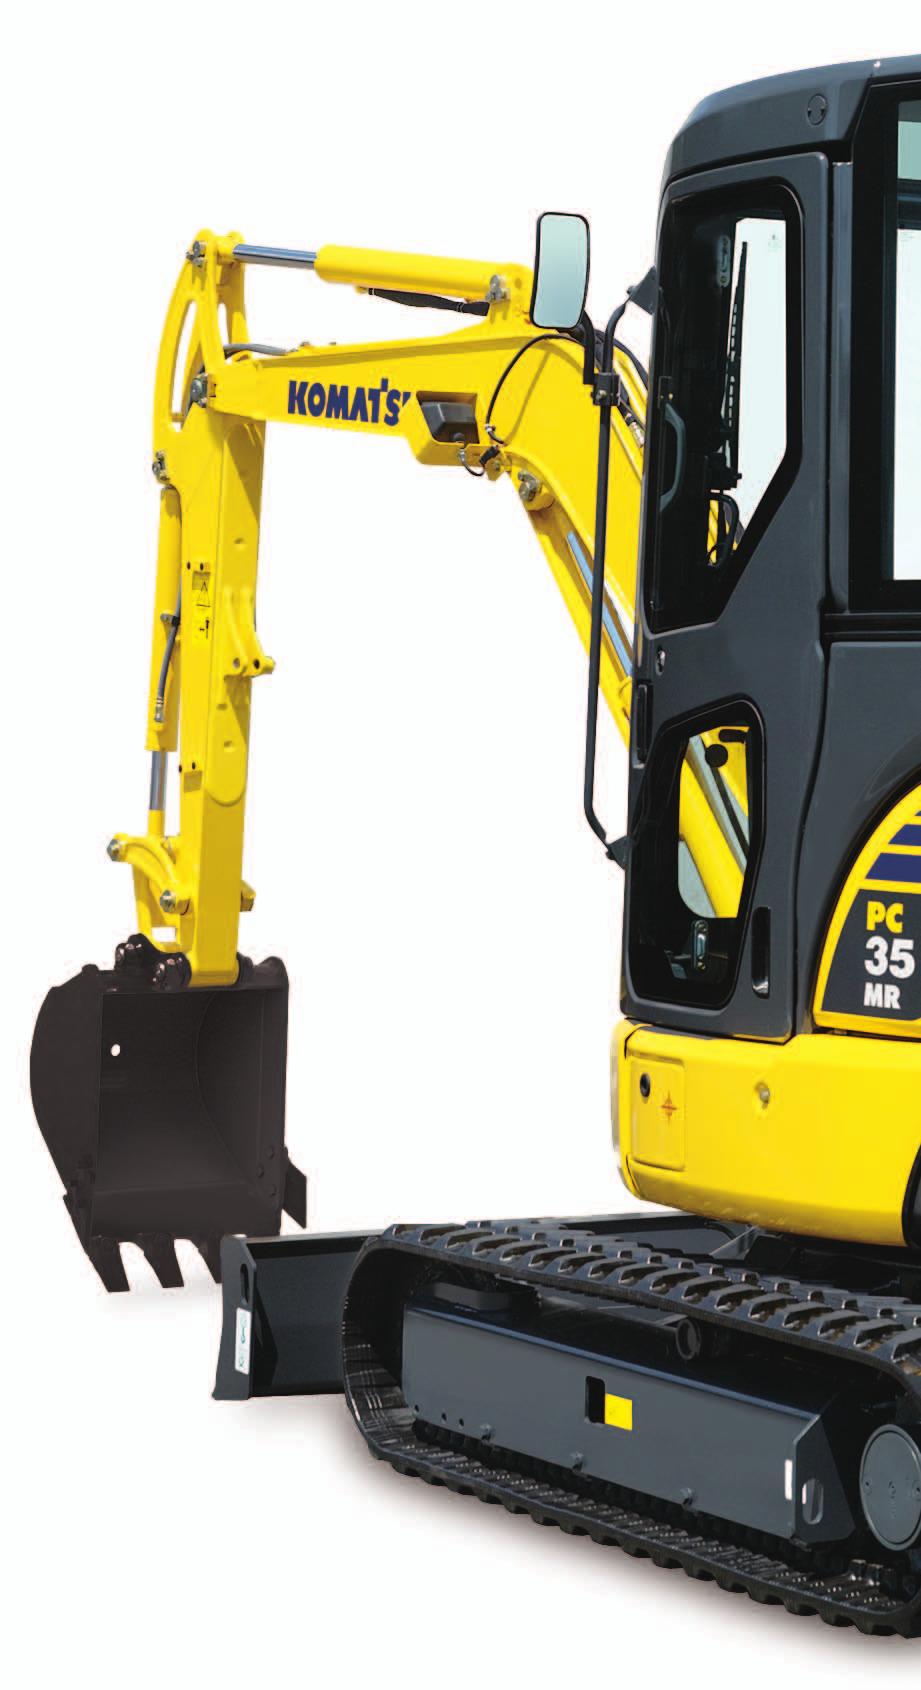 C OMPACT H YDRAULIC E XCAVATOR WALK-AROUND Performance and Versatility Standard auxiliary hydraulics Standard thumb mounting bracket Three track options: rubber, steel, roadliner Automatic two-speed